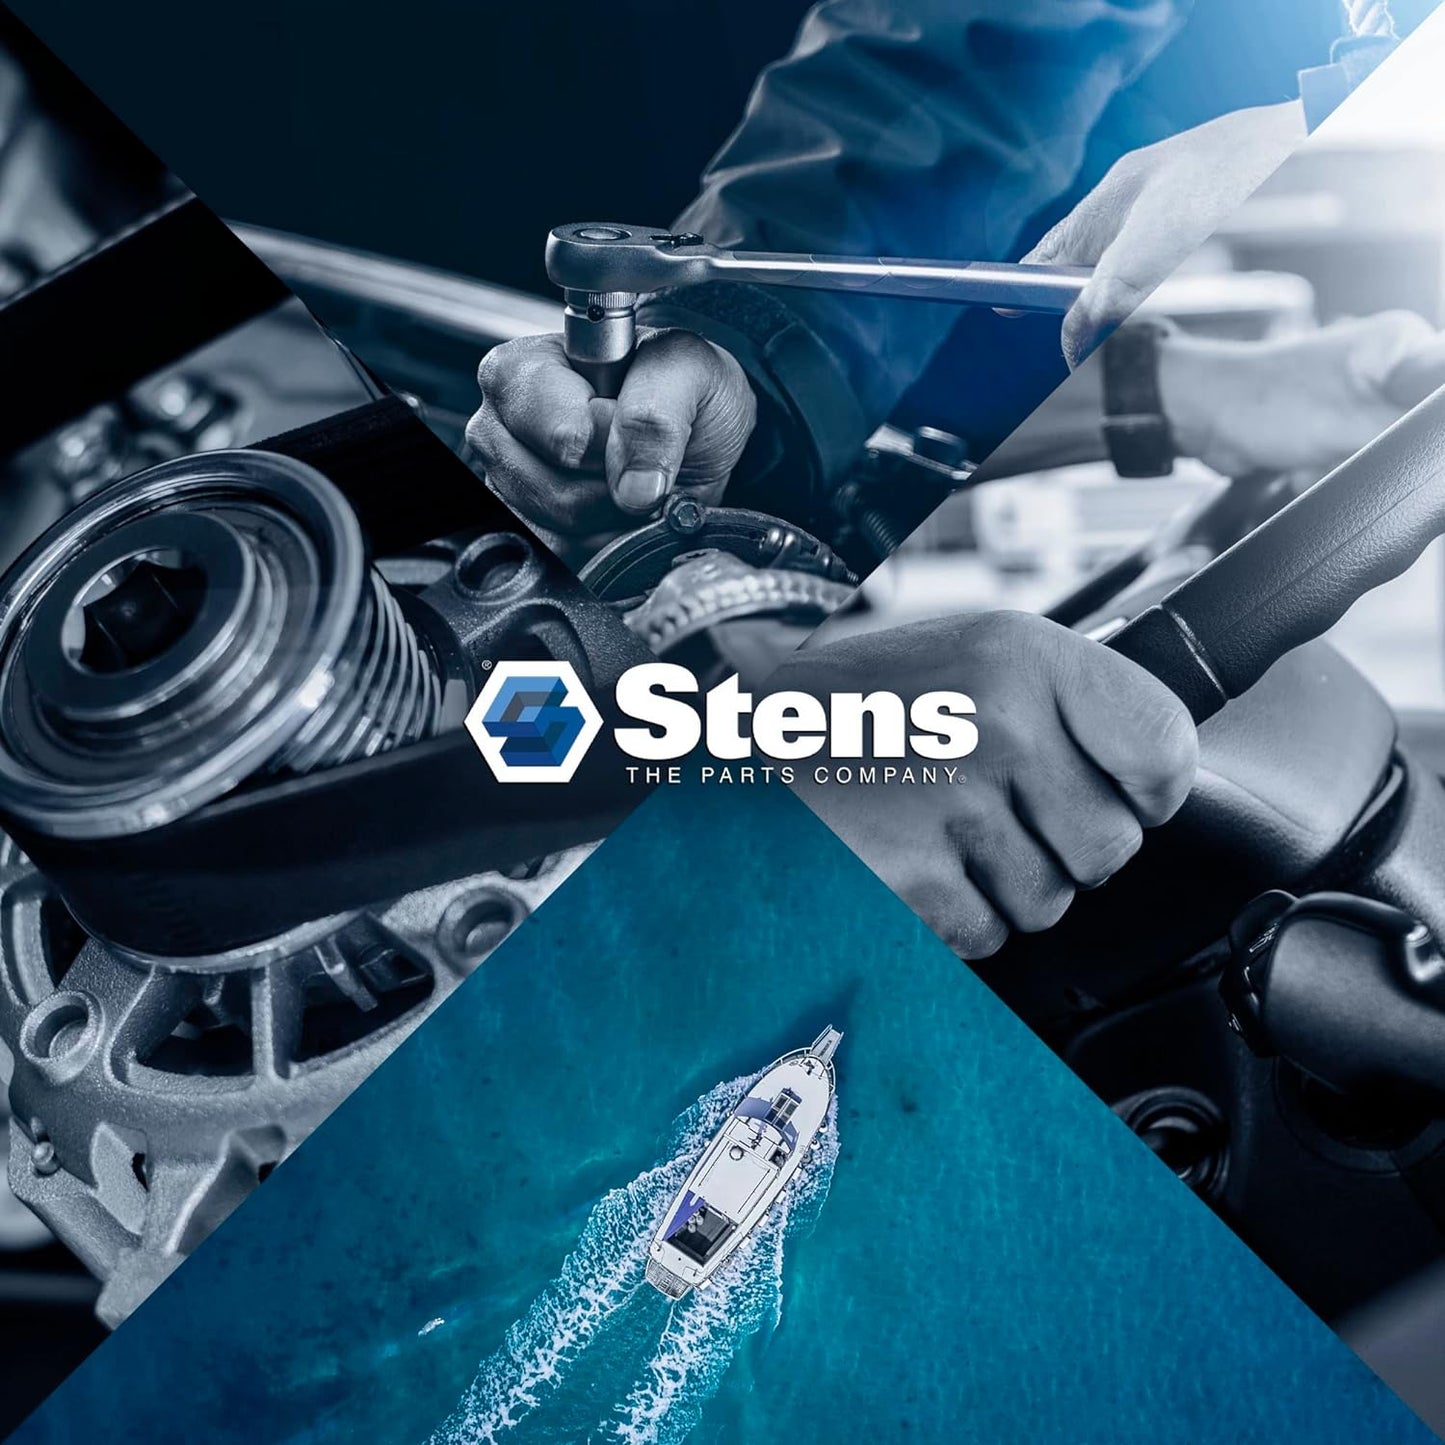 Stens 700-518 Tools, Factory